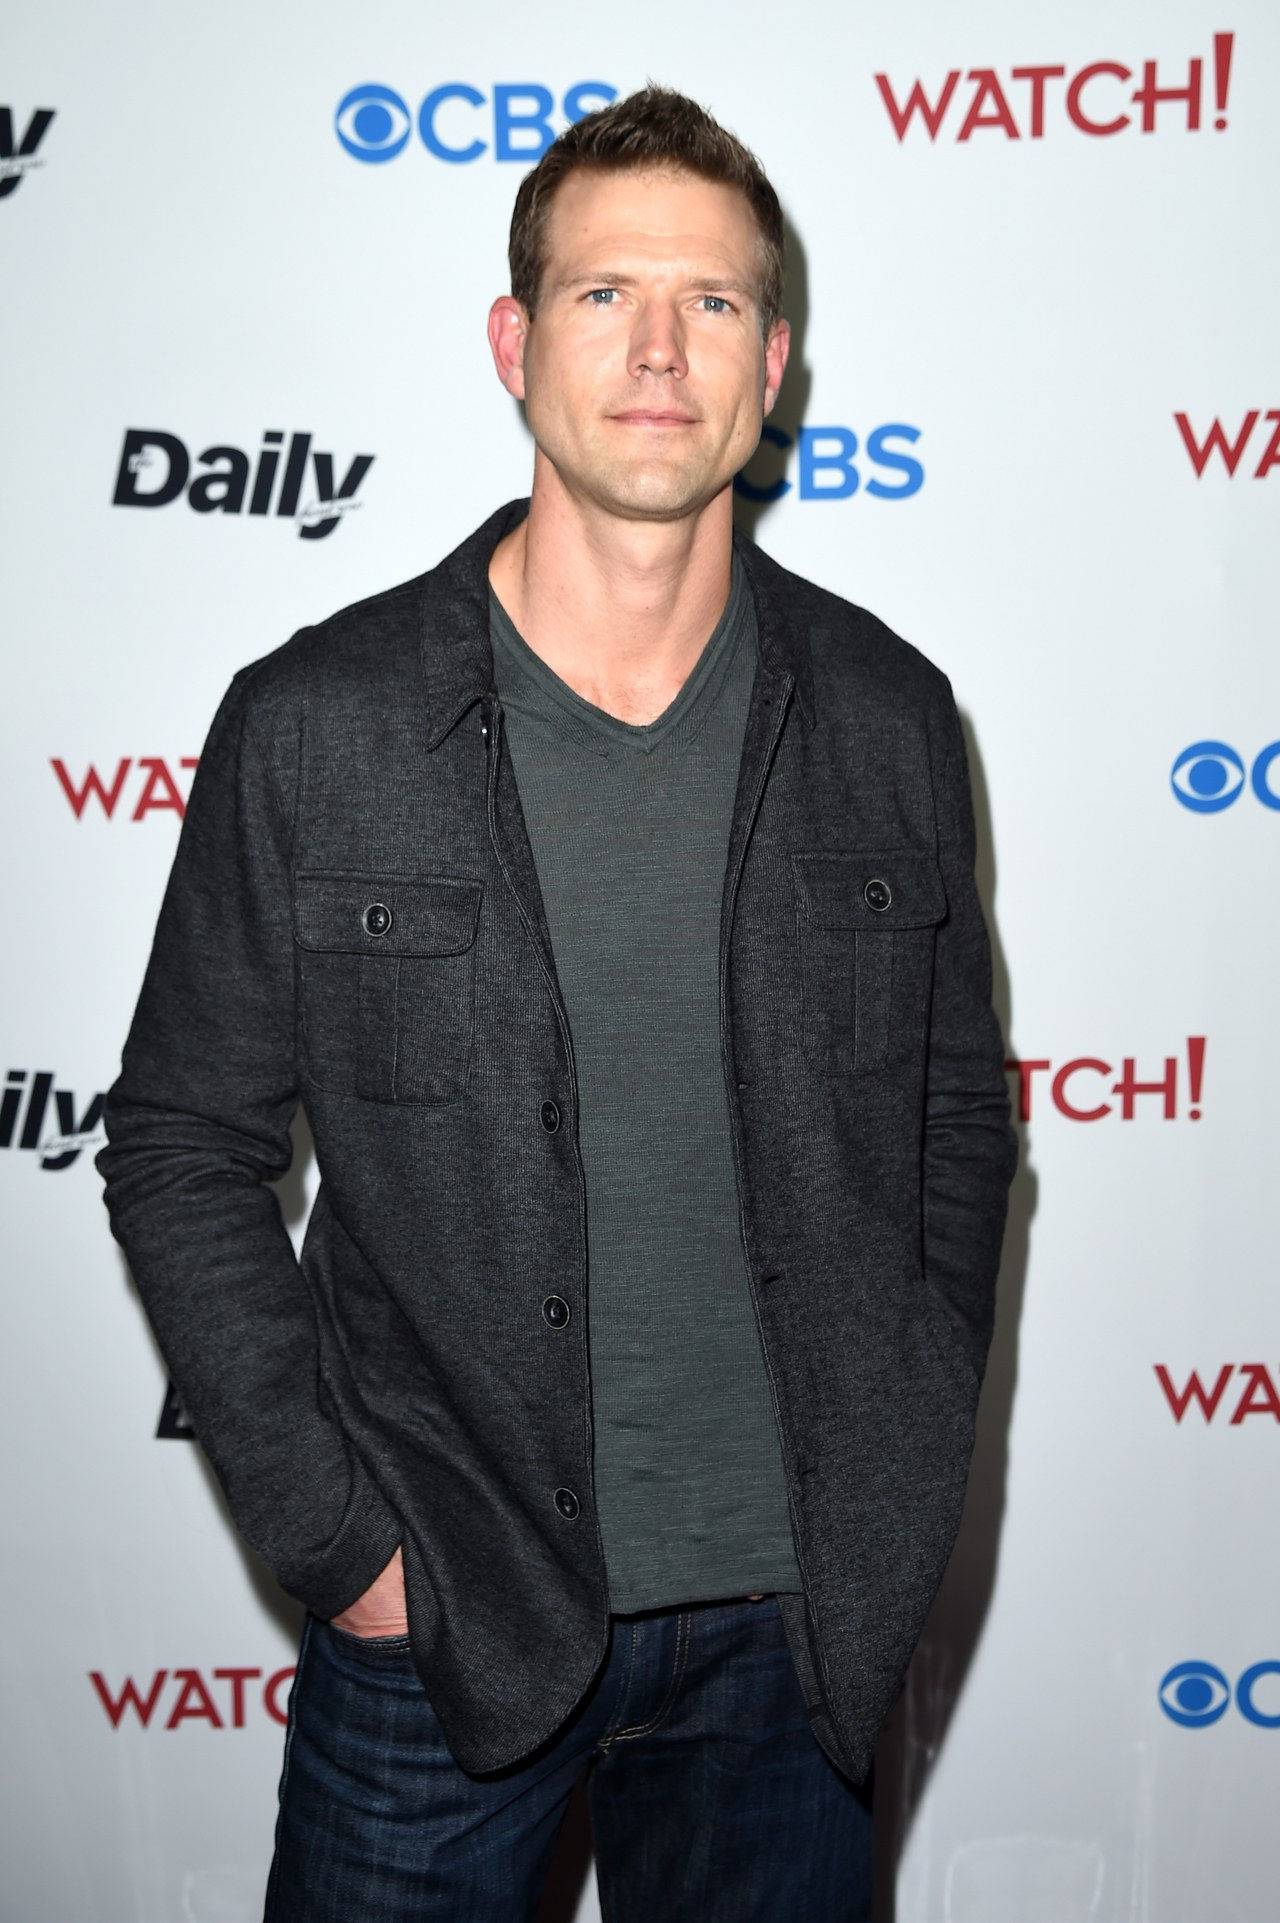 Det Daily Front Row Celebrates The 10th Anniversary Of CBS Watch! Magazine - Arrivals